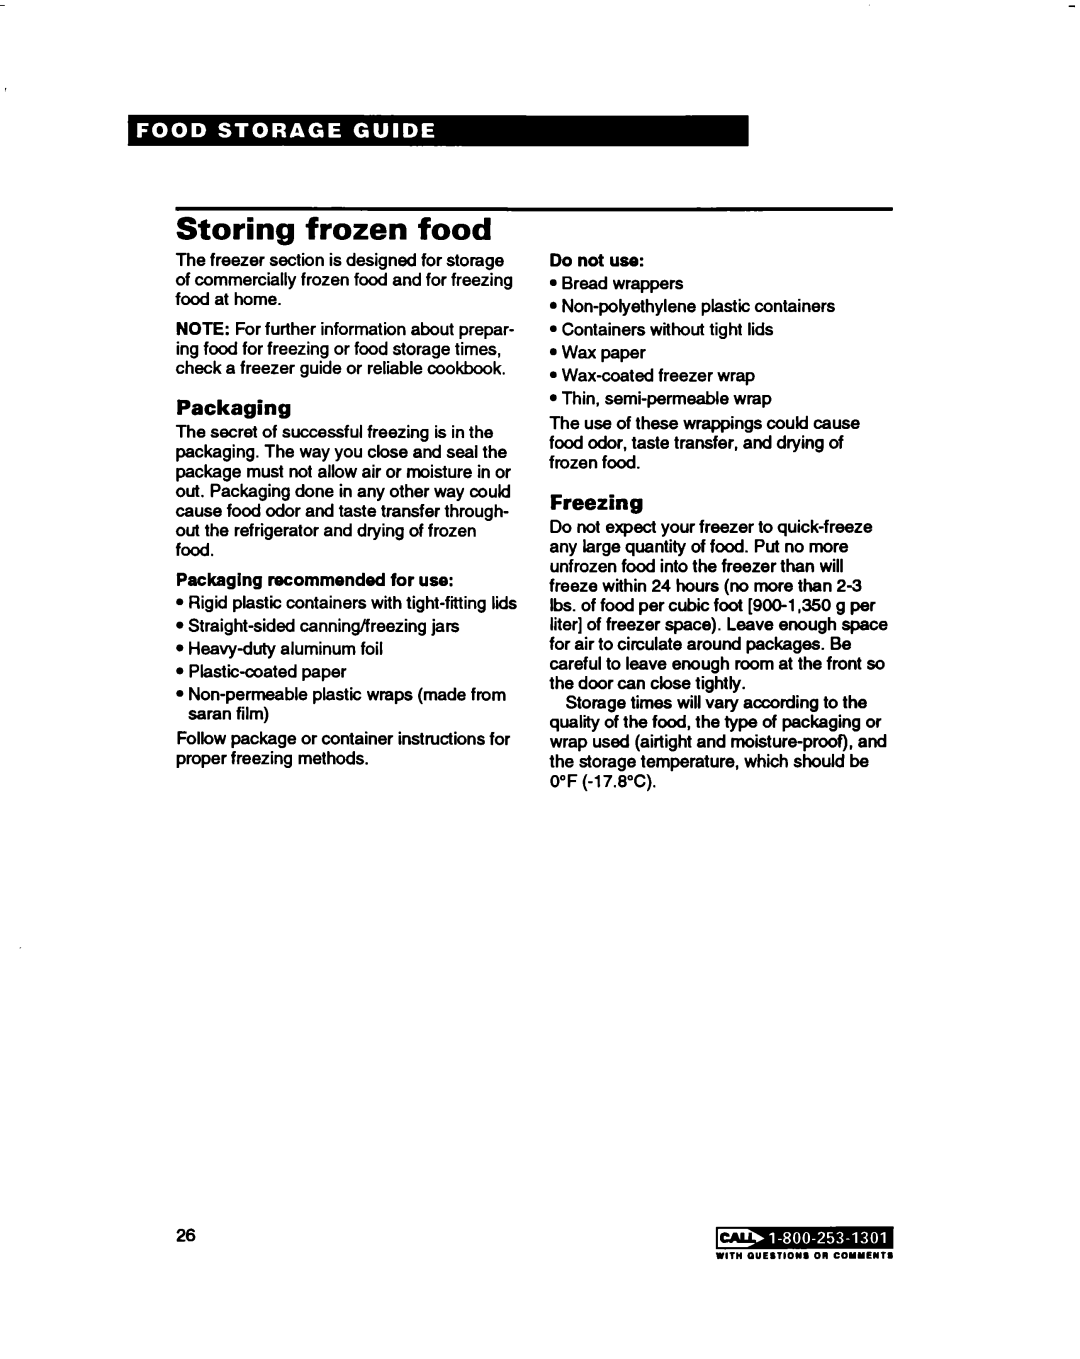 Estate 2173445 warranty Storing frozen food, Freezing, Packaging recommended for use, Do not use 